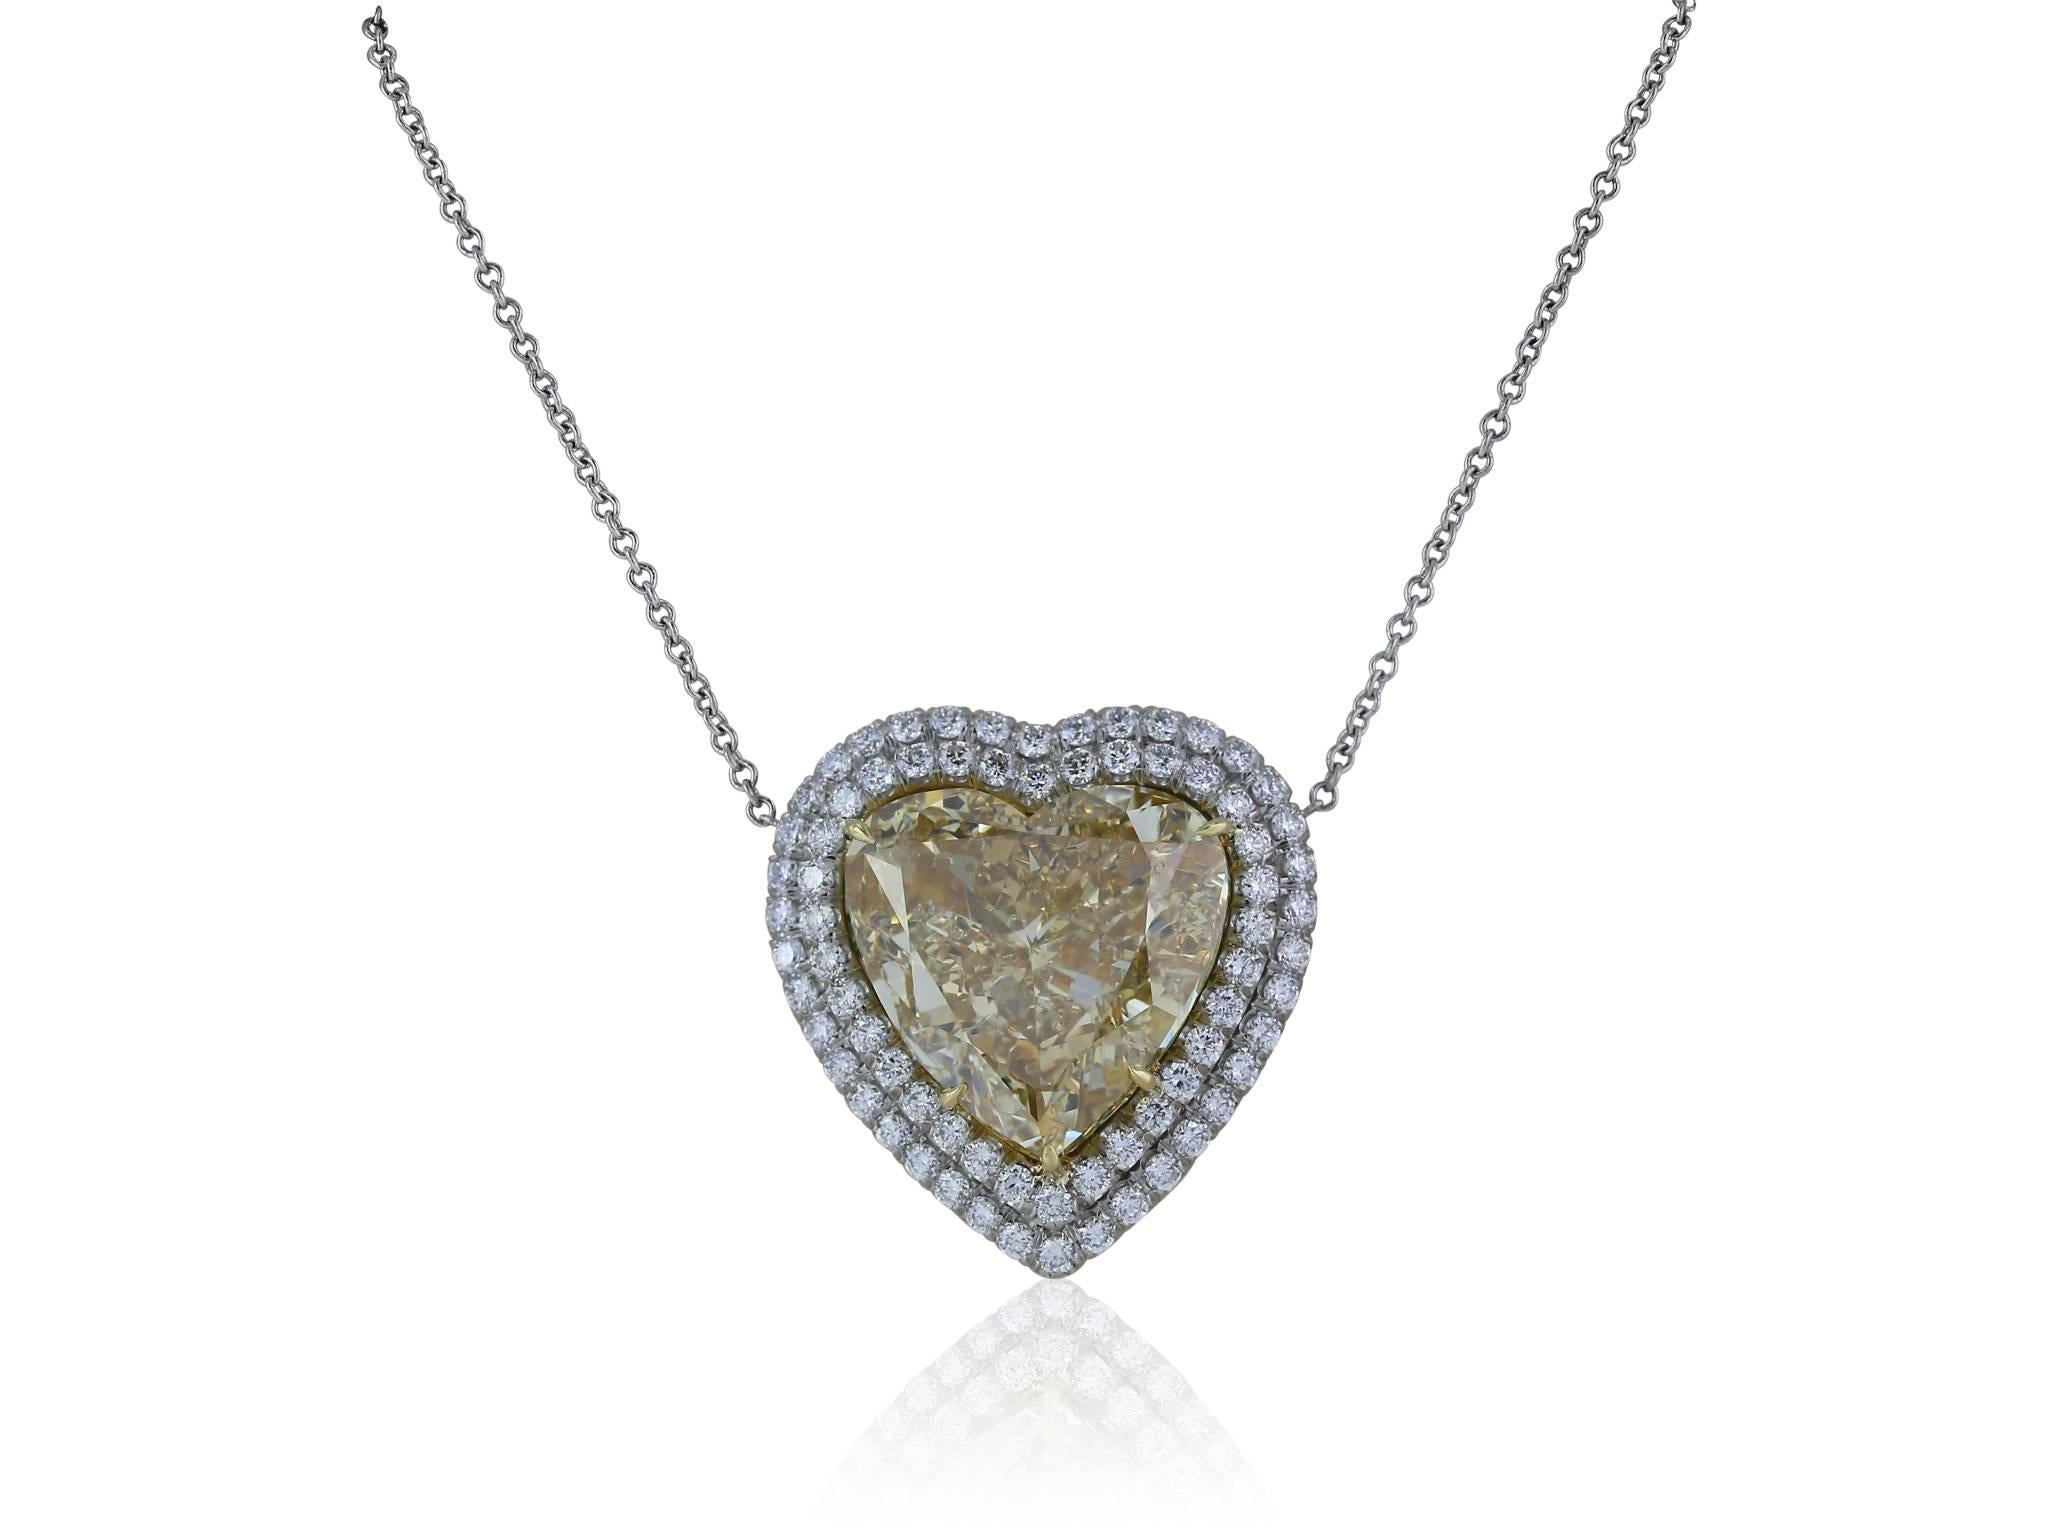 10.02 carat Fancy brownish yellow, Cinnamon heart shaped diamond, surrounded by a double halo of round brilliant diamonds with an approximate weight of 1.20 carats, set in a platinum and 18 karat yellow gold setting with an open work designed back